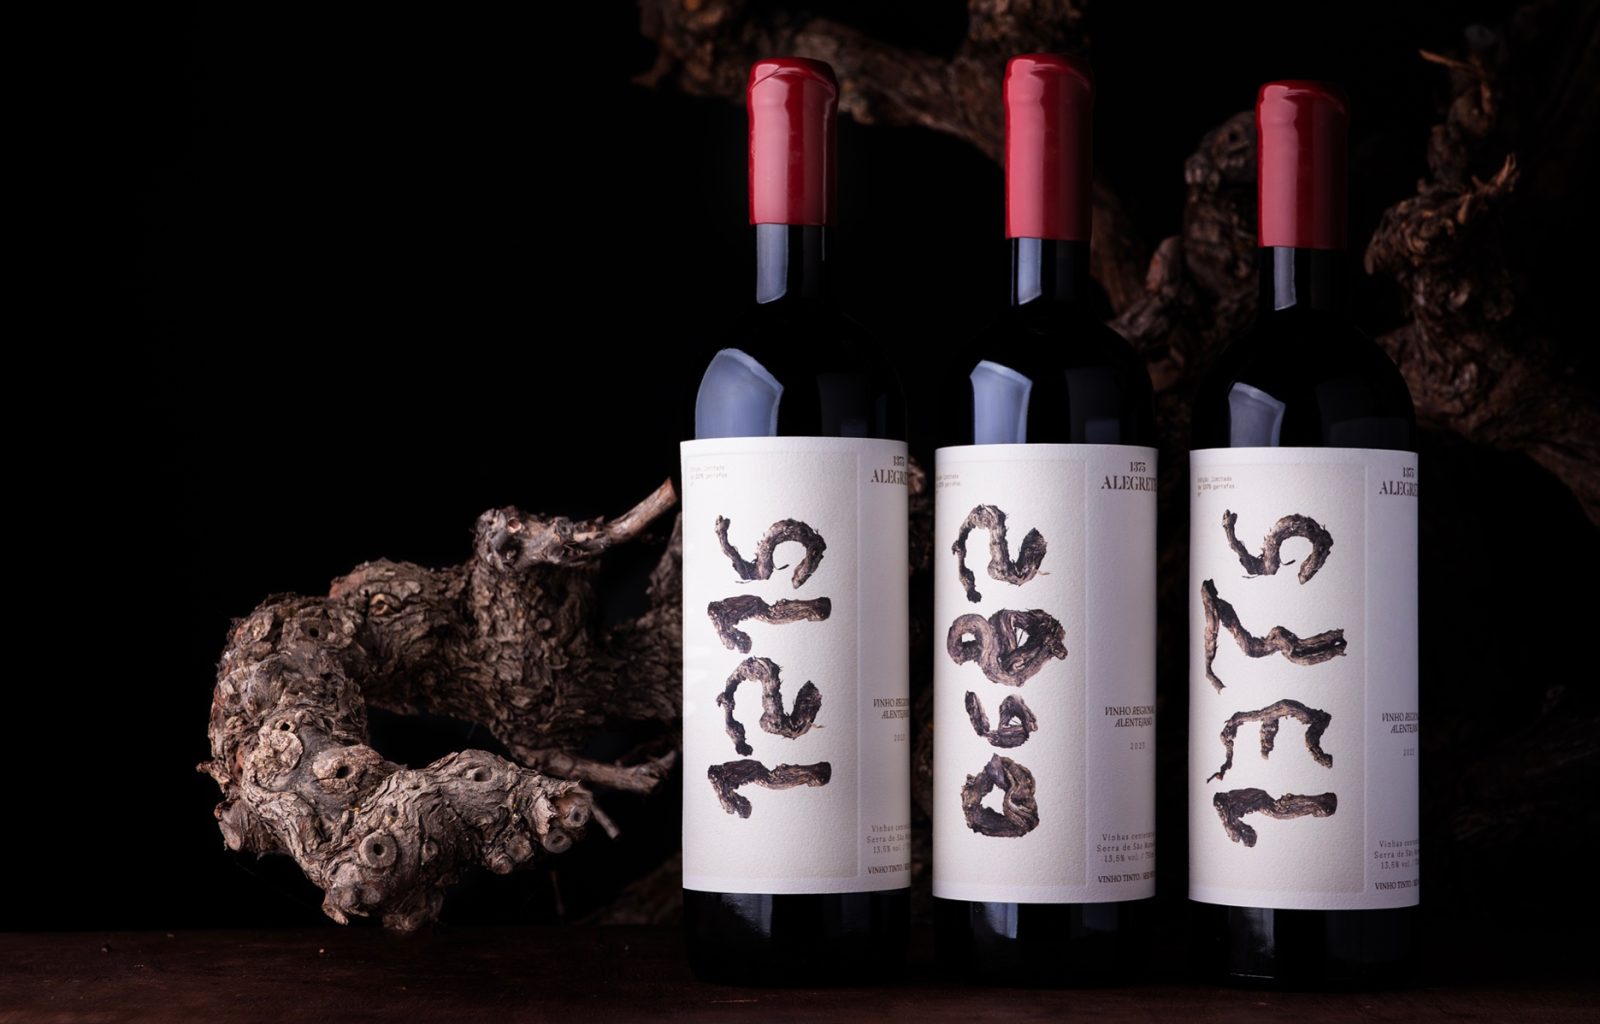 Alegrete1375 Wine: Crafting Uniqueness from Ancient Vines to Limited Edition Bottles